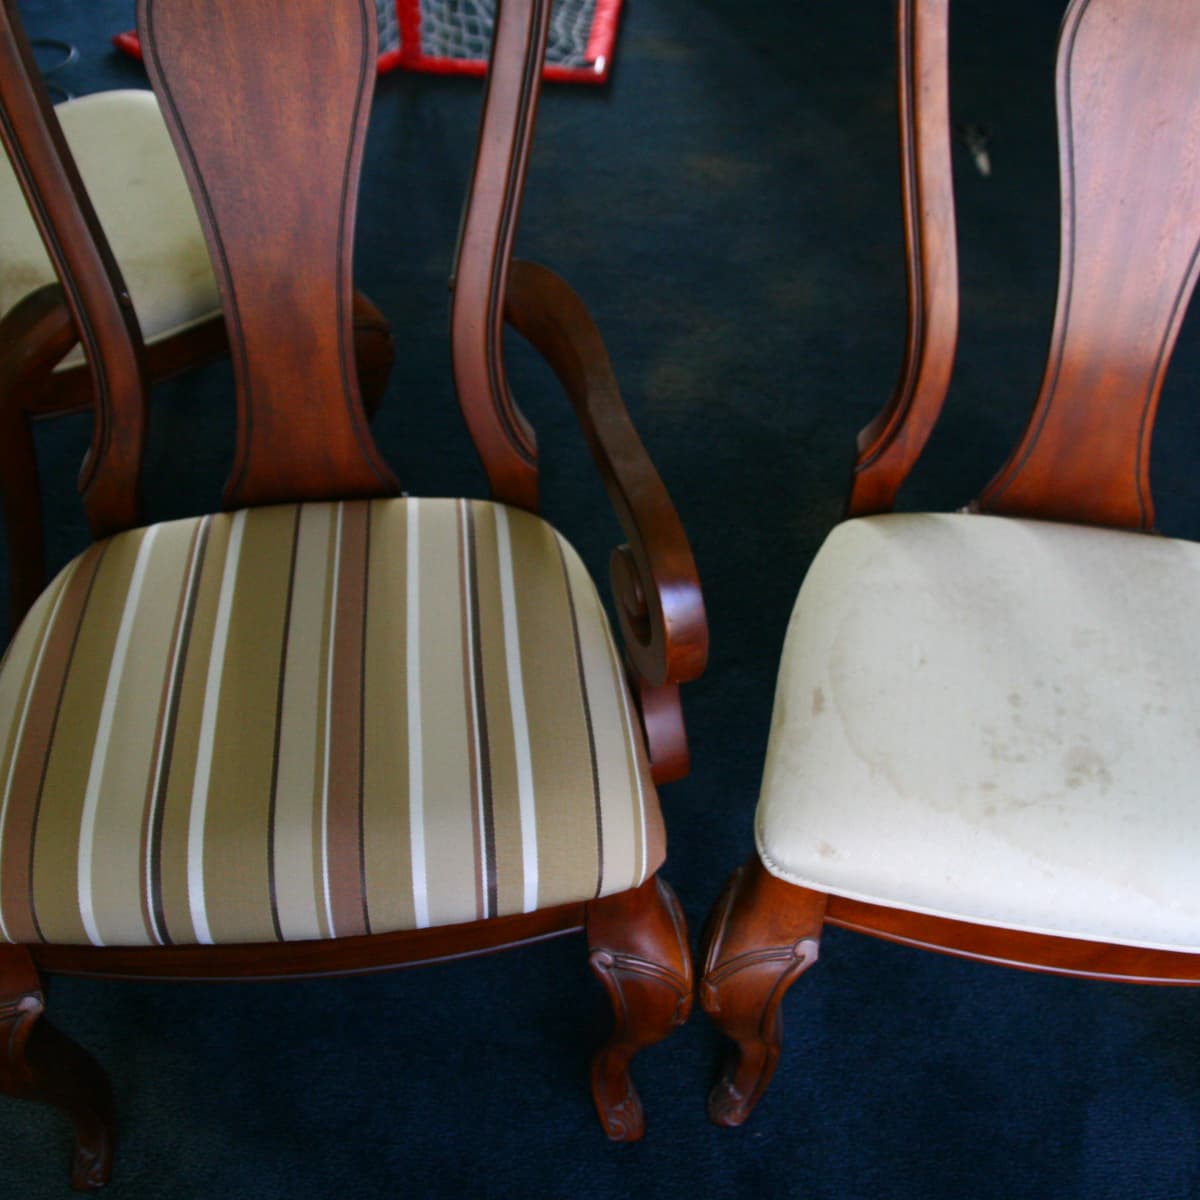 How To Reupholster A Dining Room Chair, Reupholster Dining Chairs Cost Uk